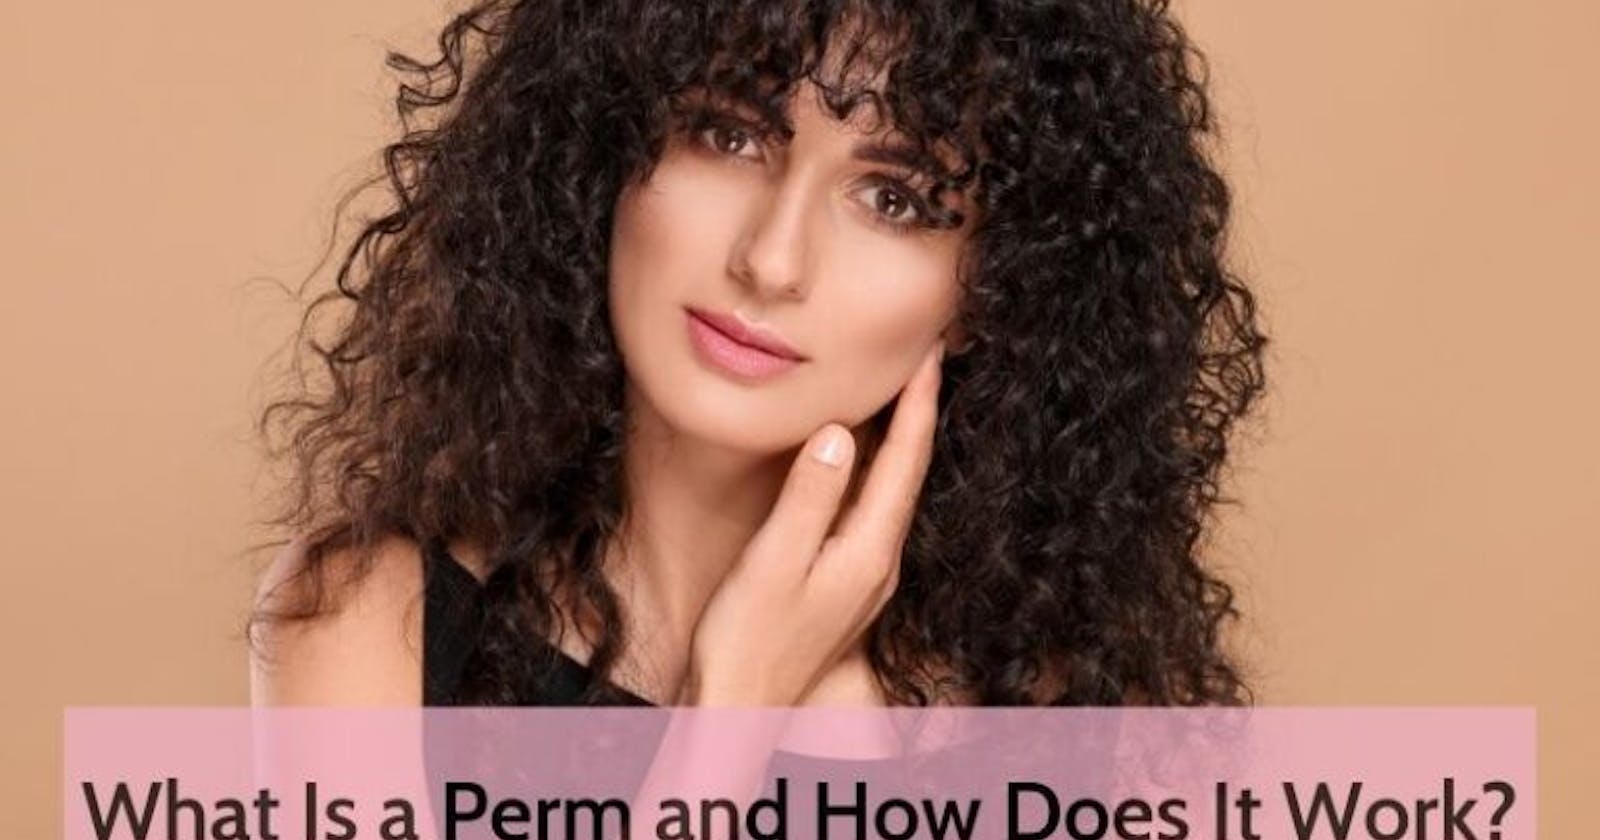 What Is A Perm And How Does It Work?